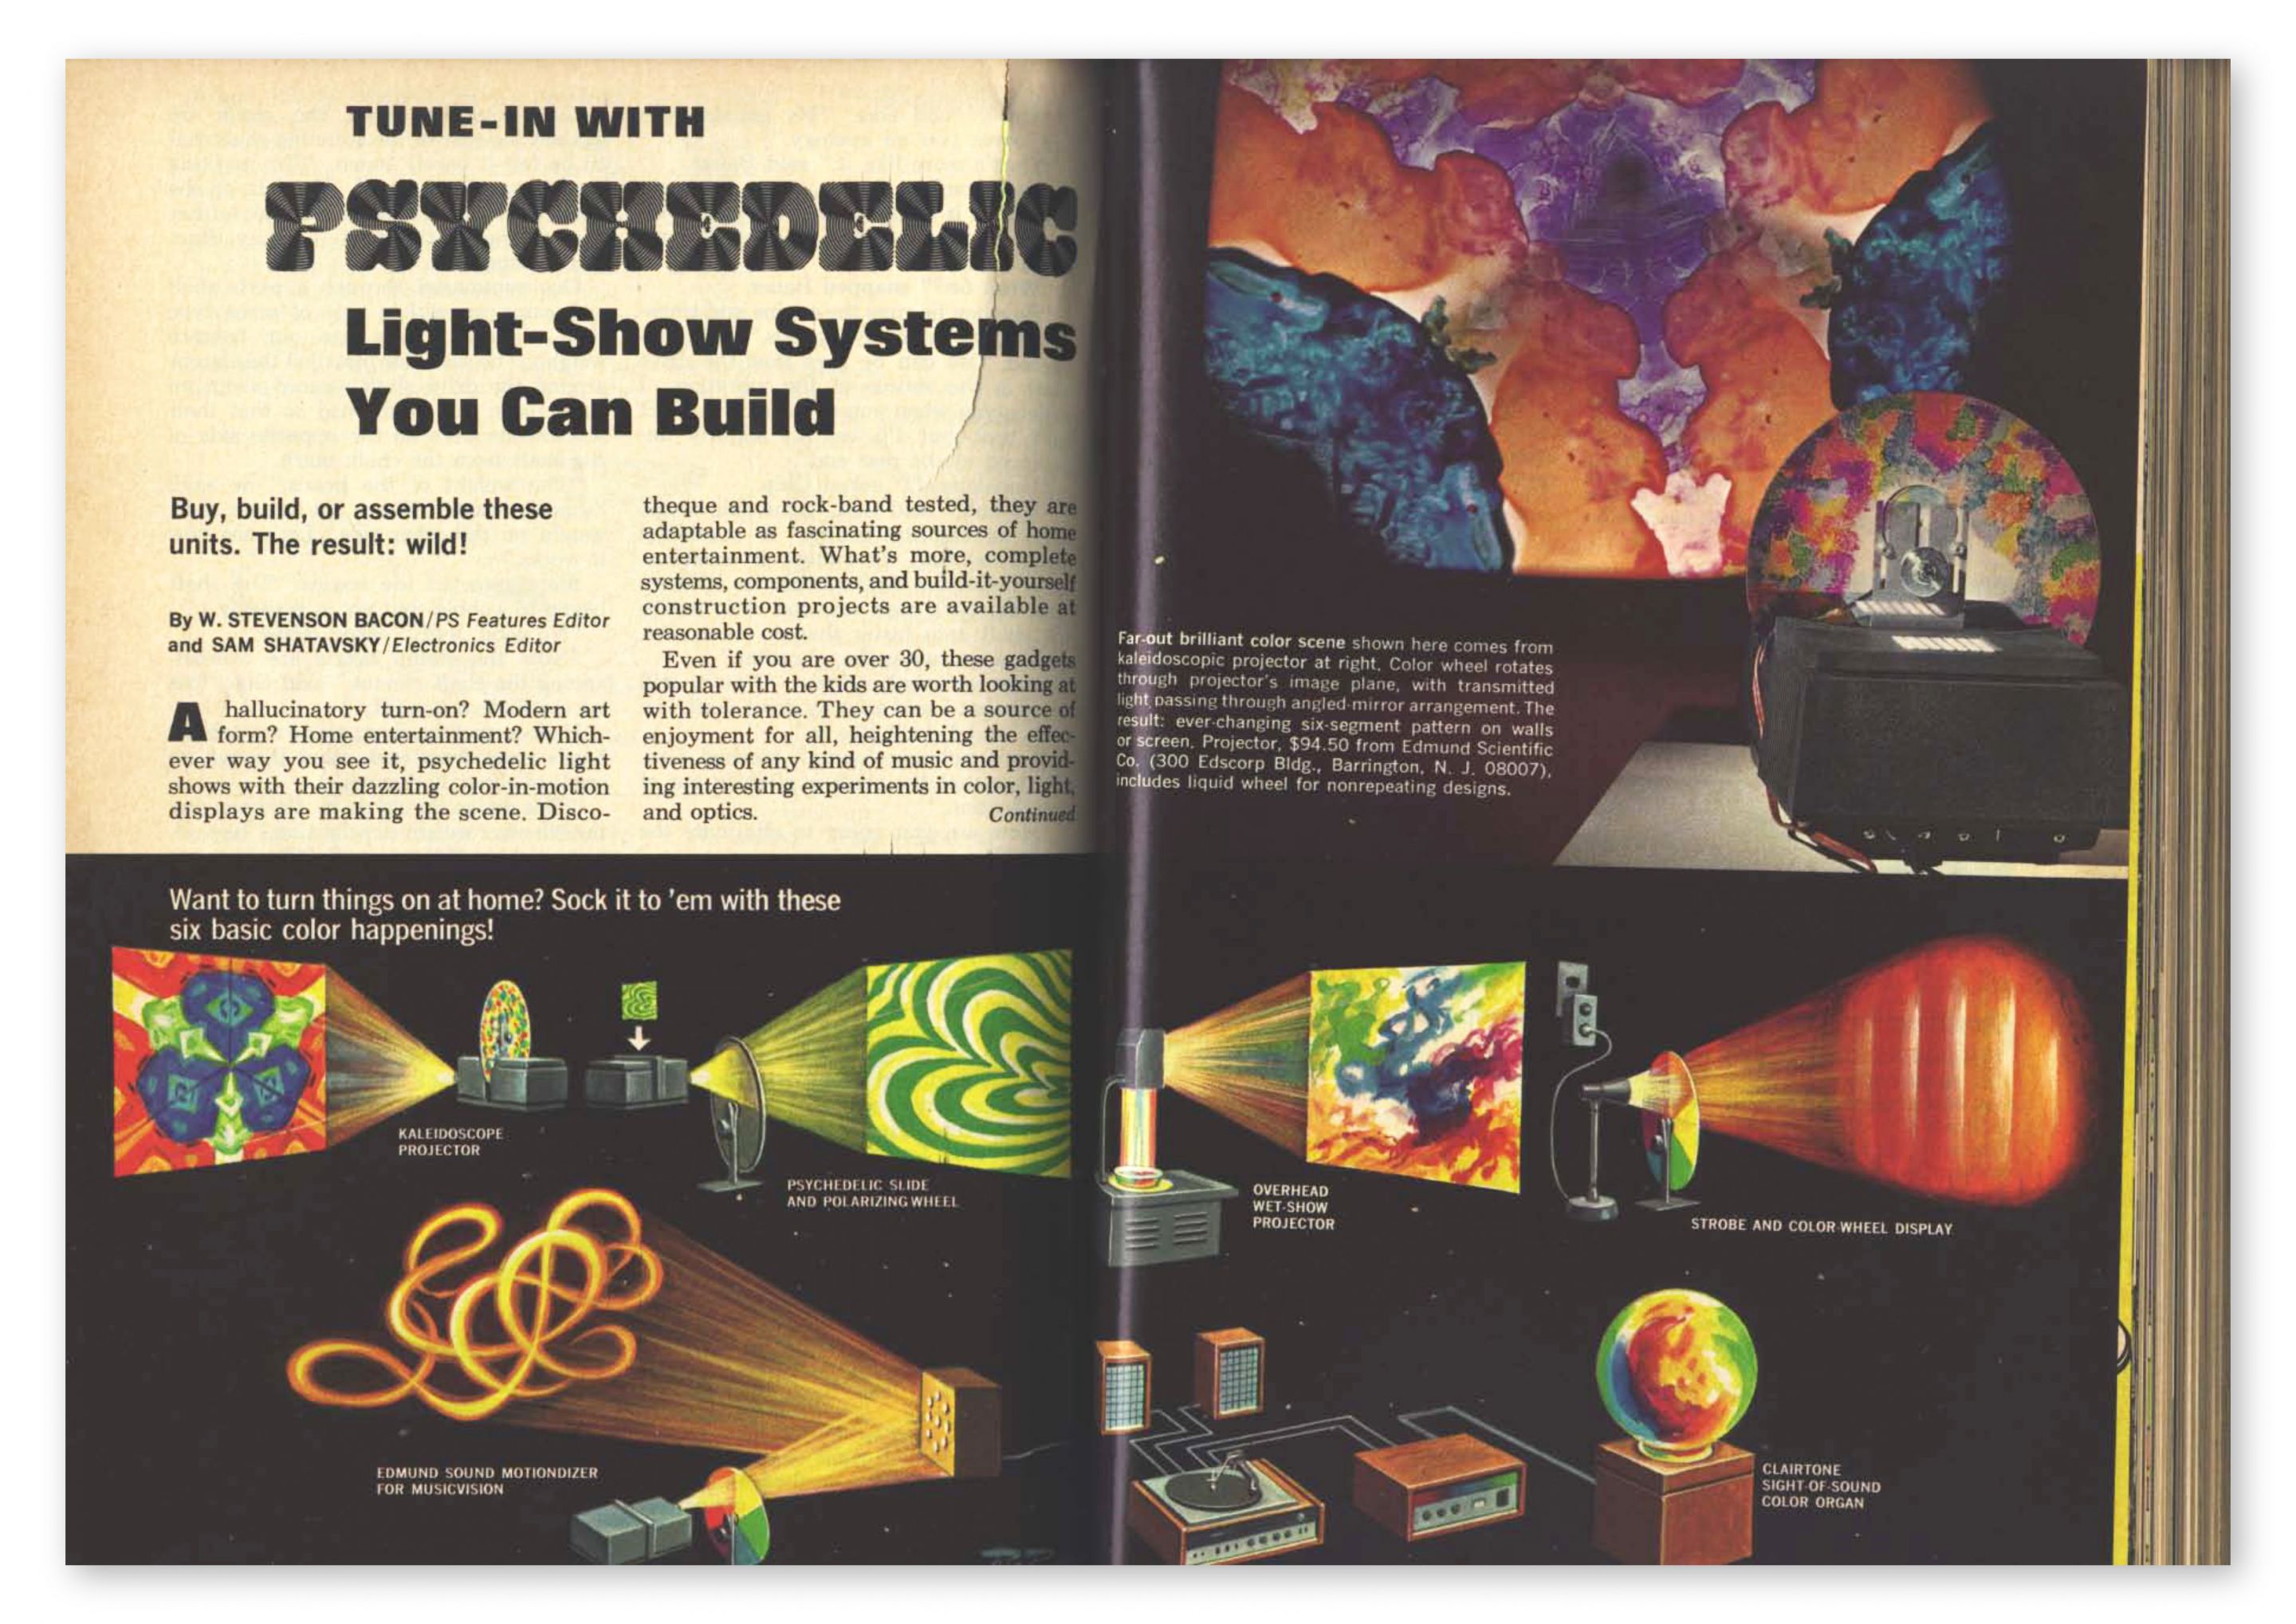 Popular Science Magazine, May 1969, Psychedelic Light-Show Systems